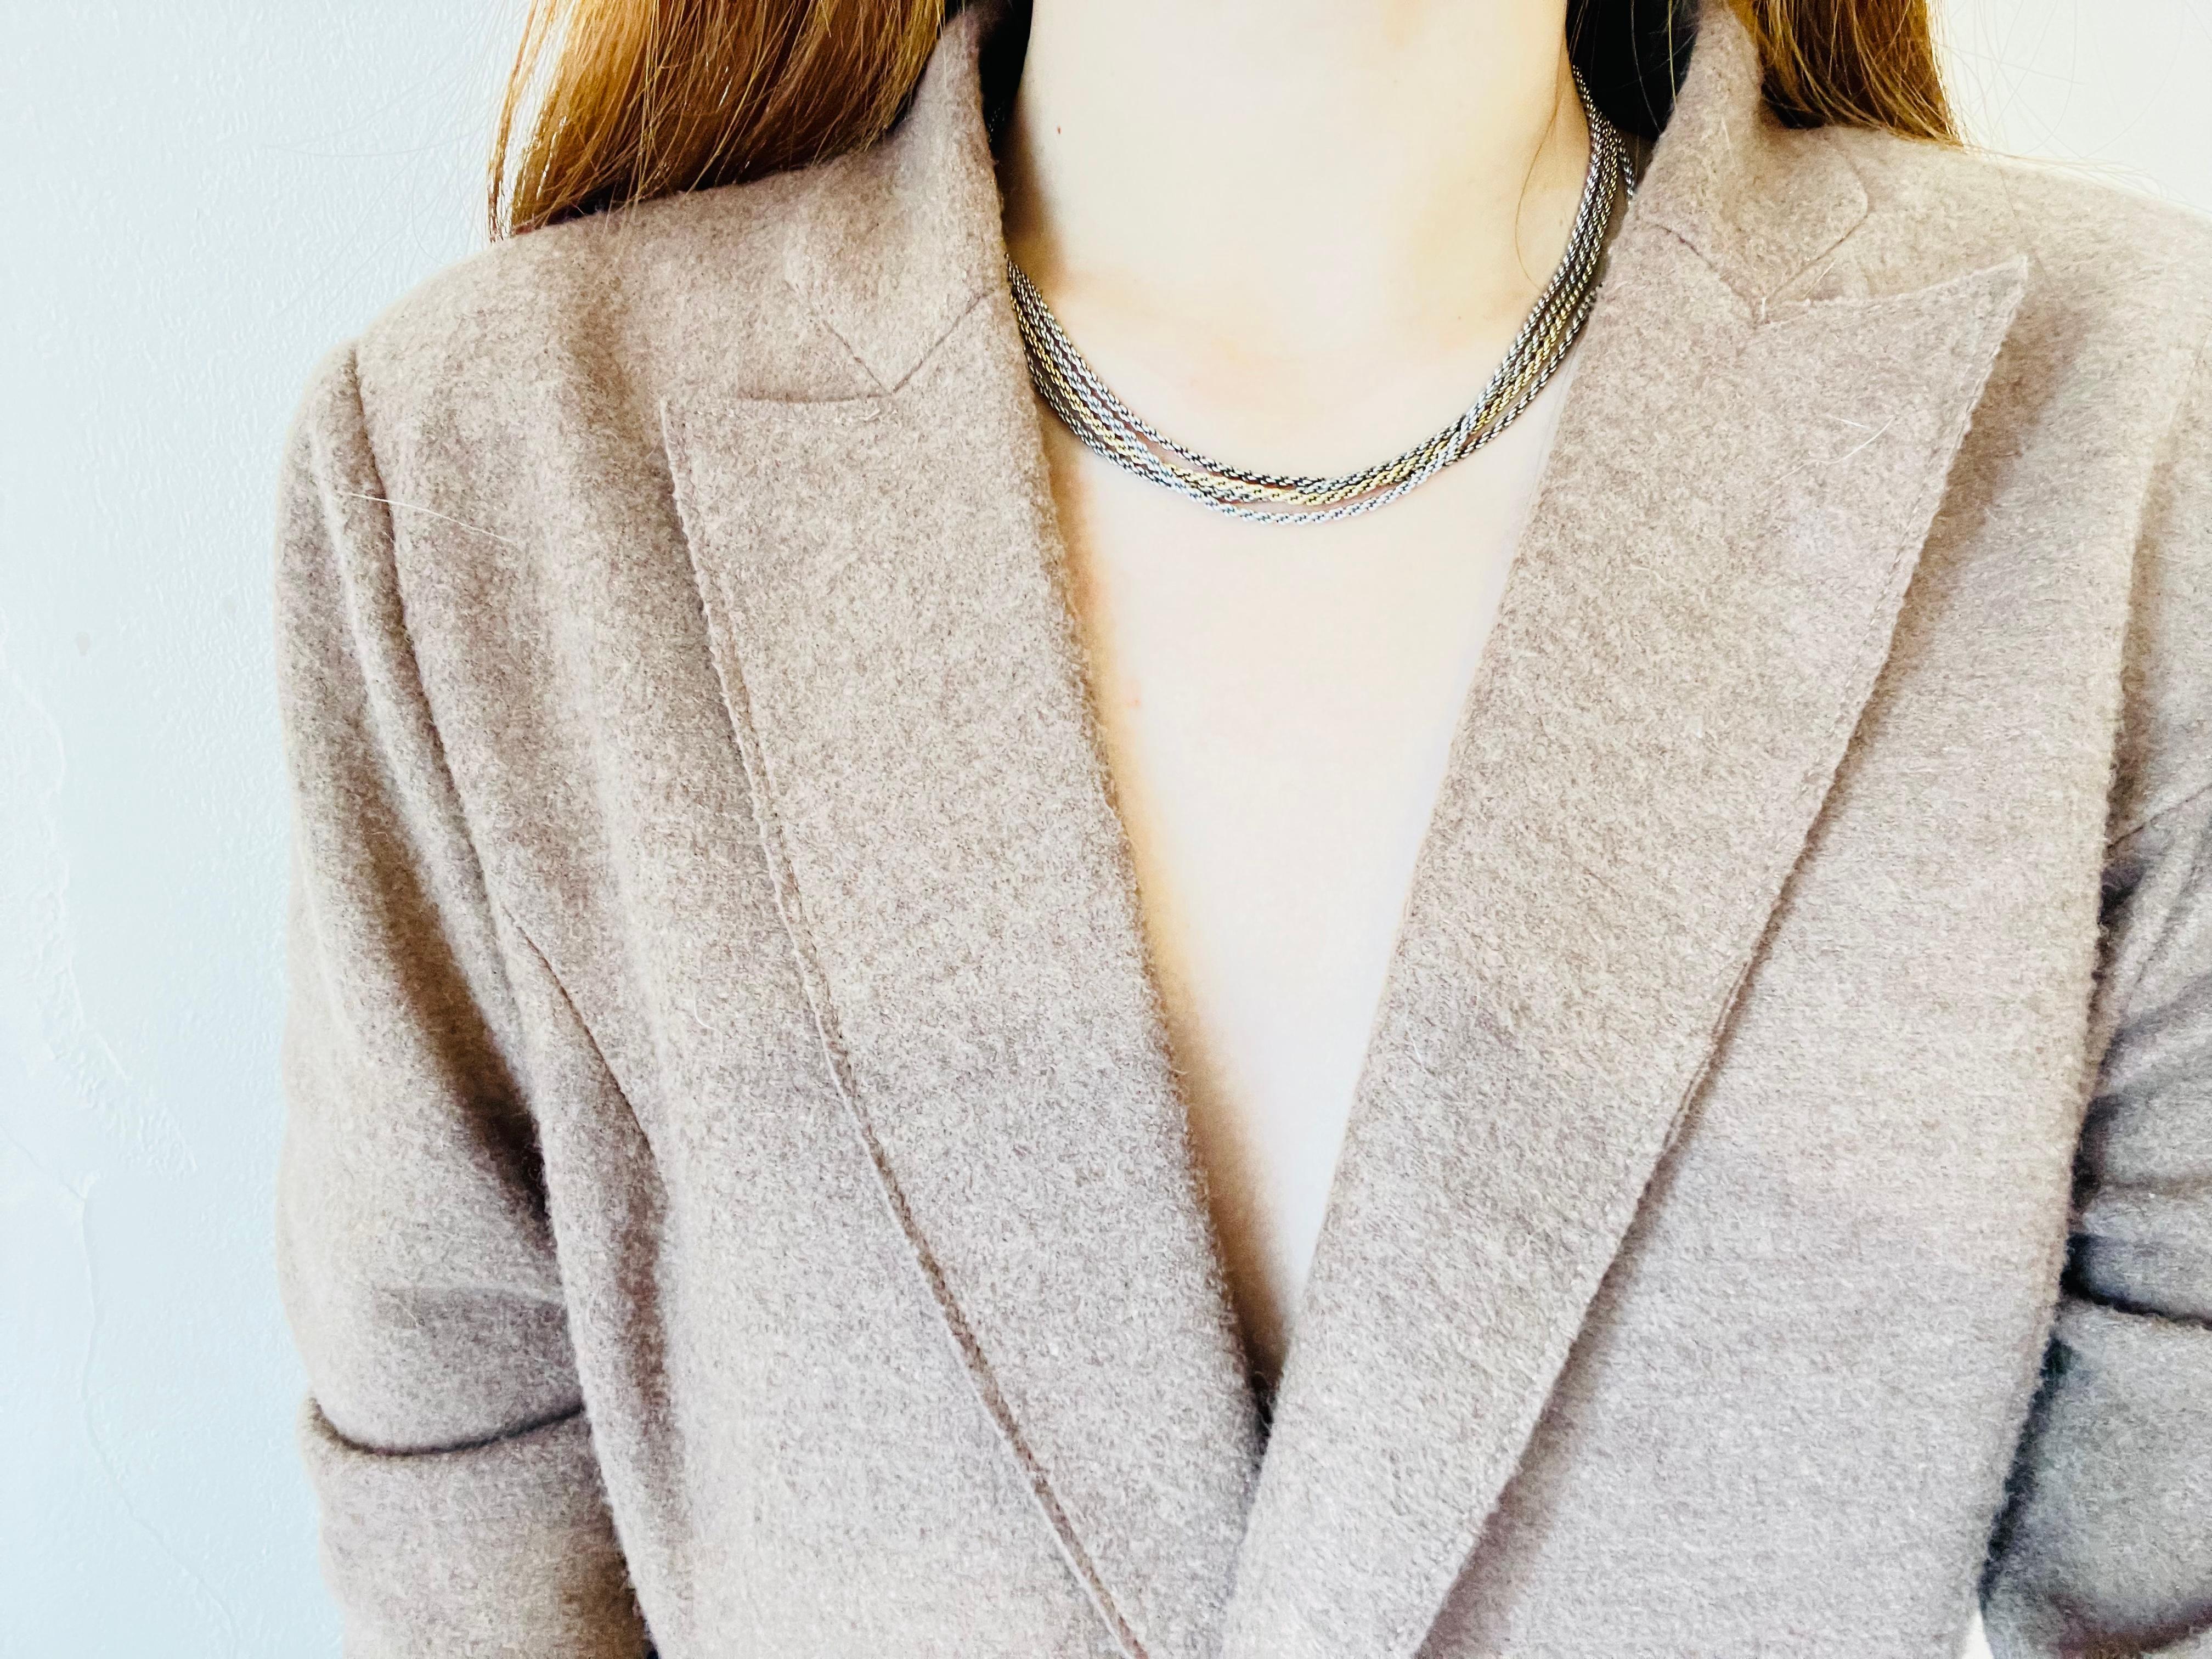 Christian Dior Vintage 1970s Four 4 Strands Layers Chain Necklace, Gold Silver In Good Condition For Sale In Wokingham, England